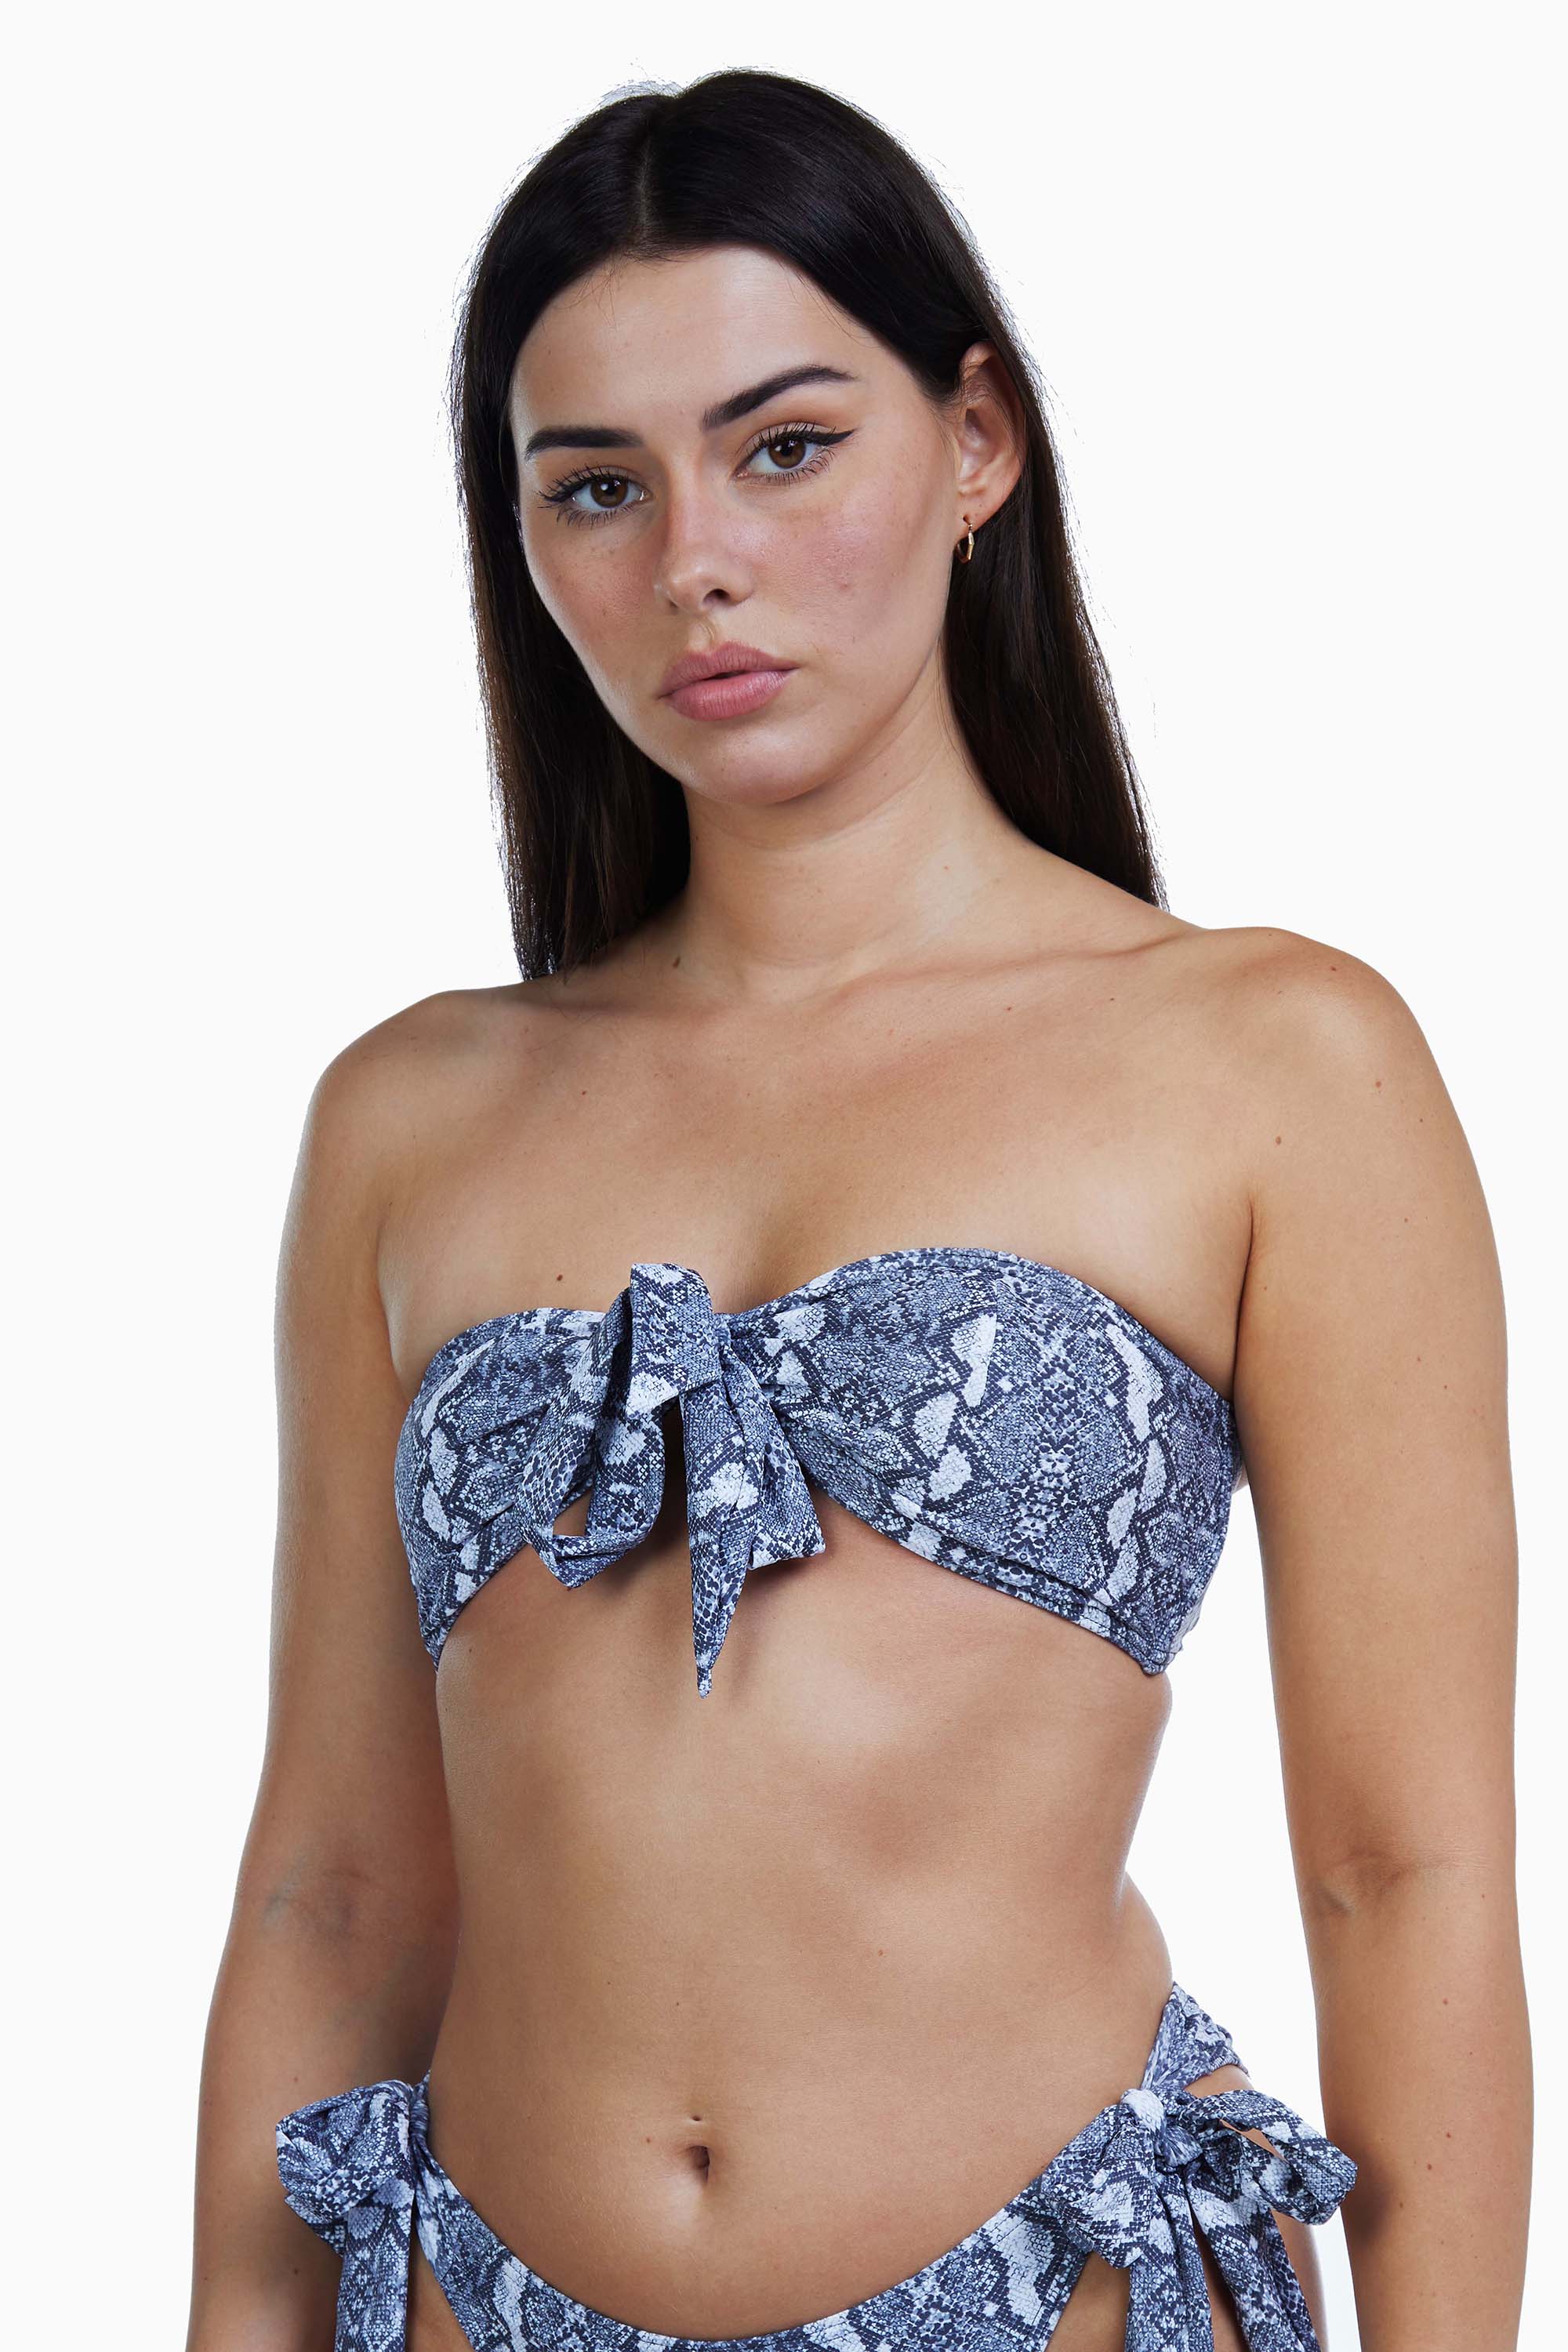 Snake Bow Tie Bandeau